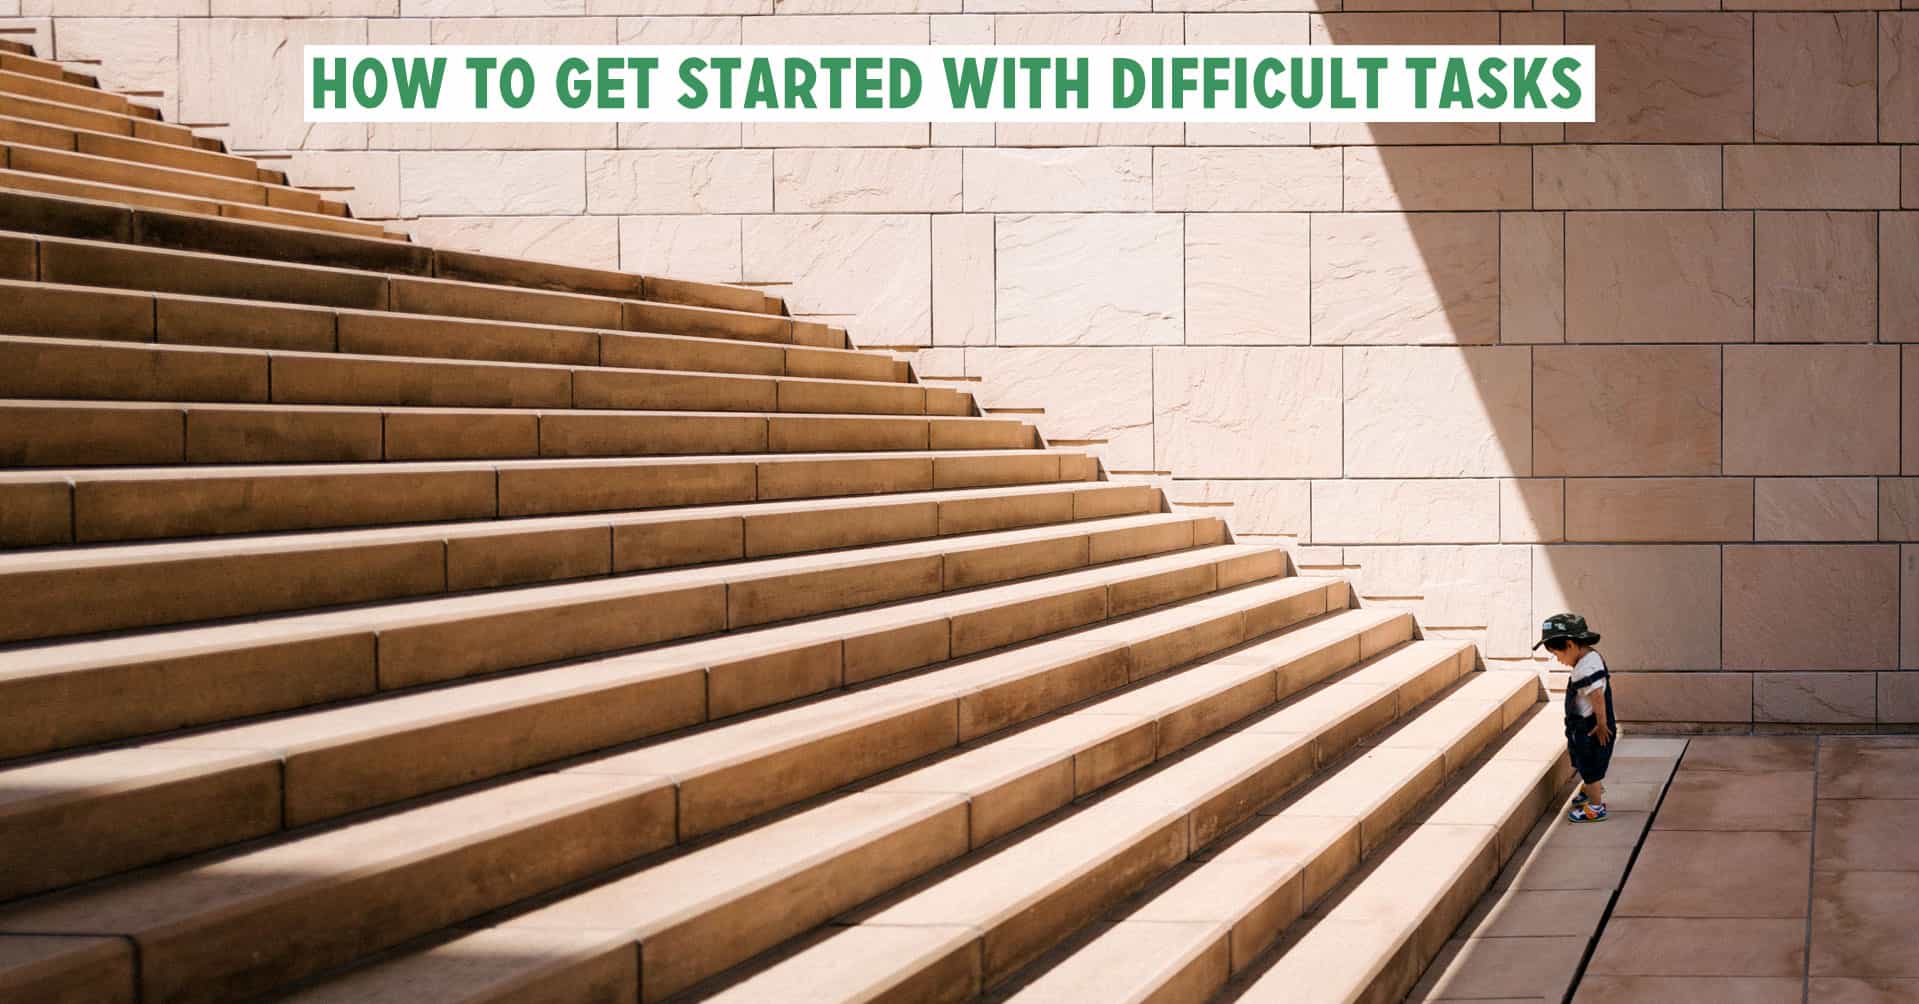 How to get started with difficult tasks